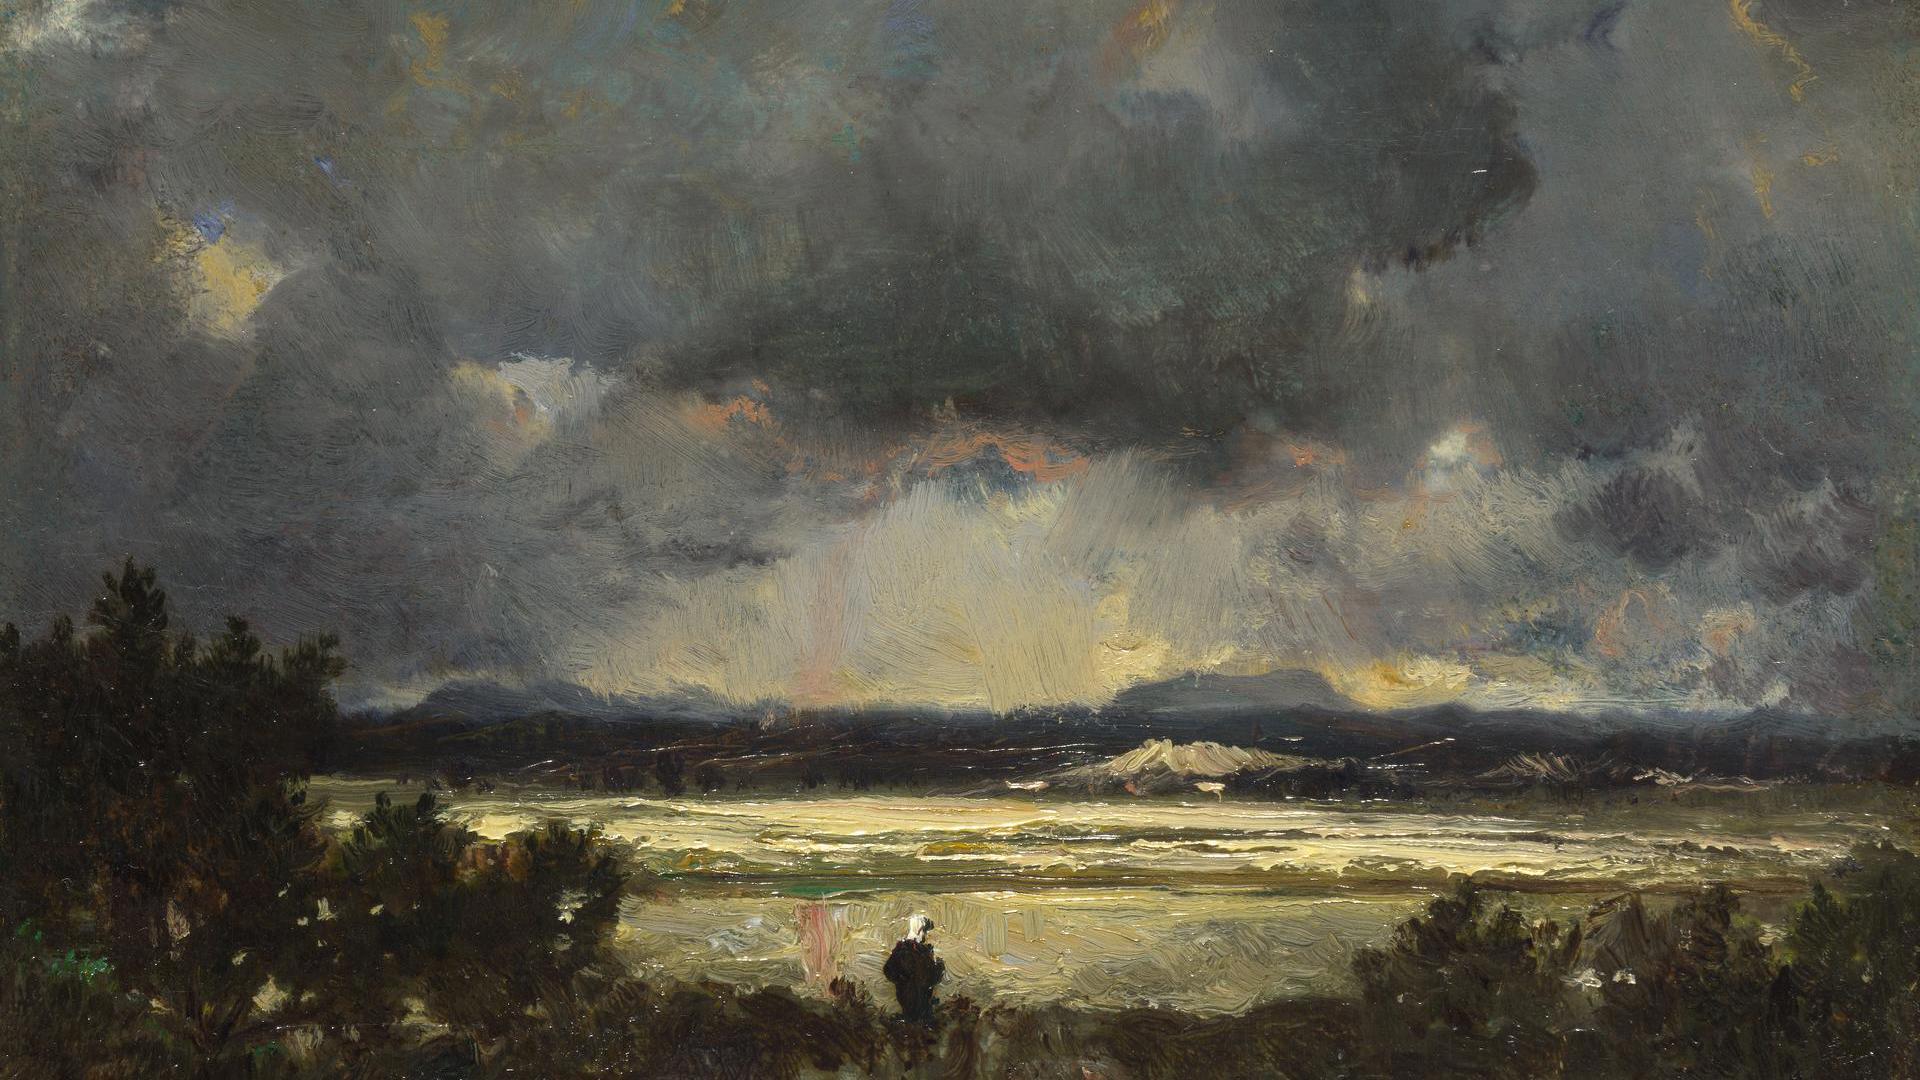 Landscape with Stormy Sunset by Théodore Rousseau